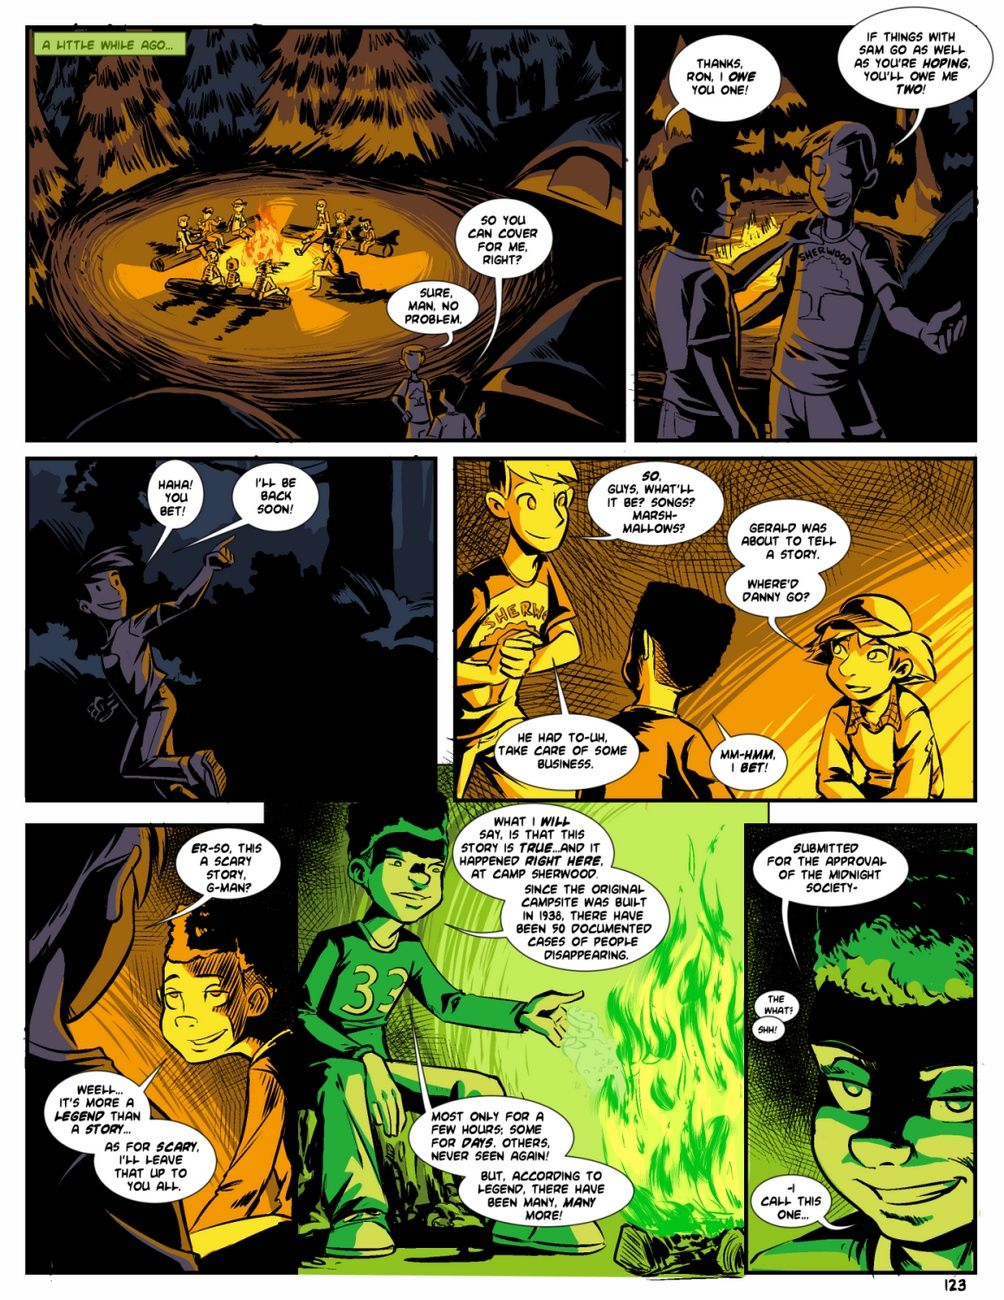 Camp Sherwood [Mr.D] (Ongoing) page 124